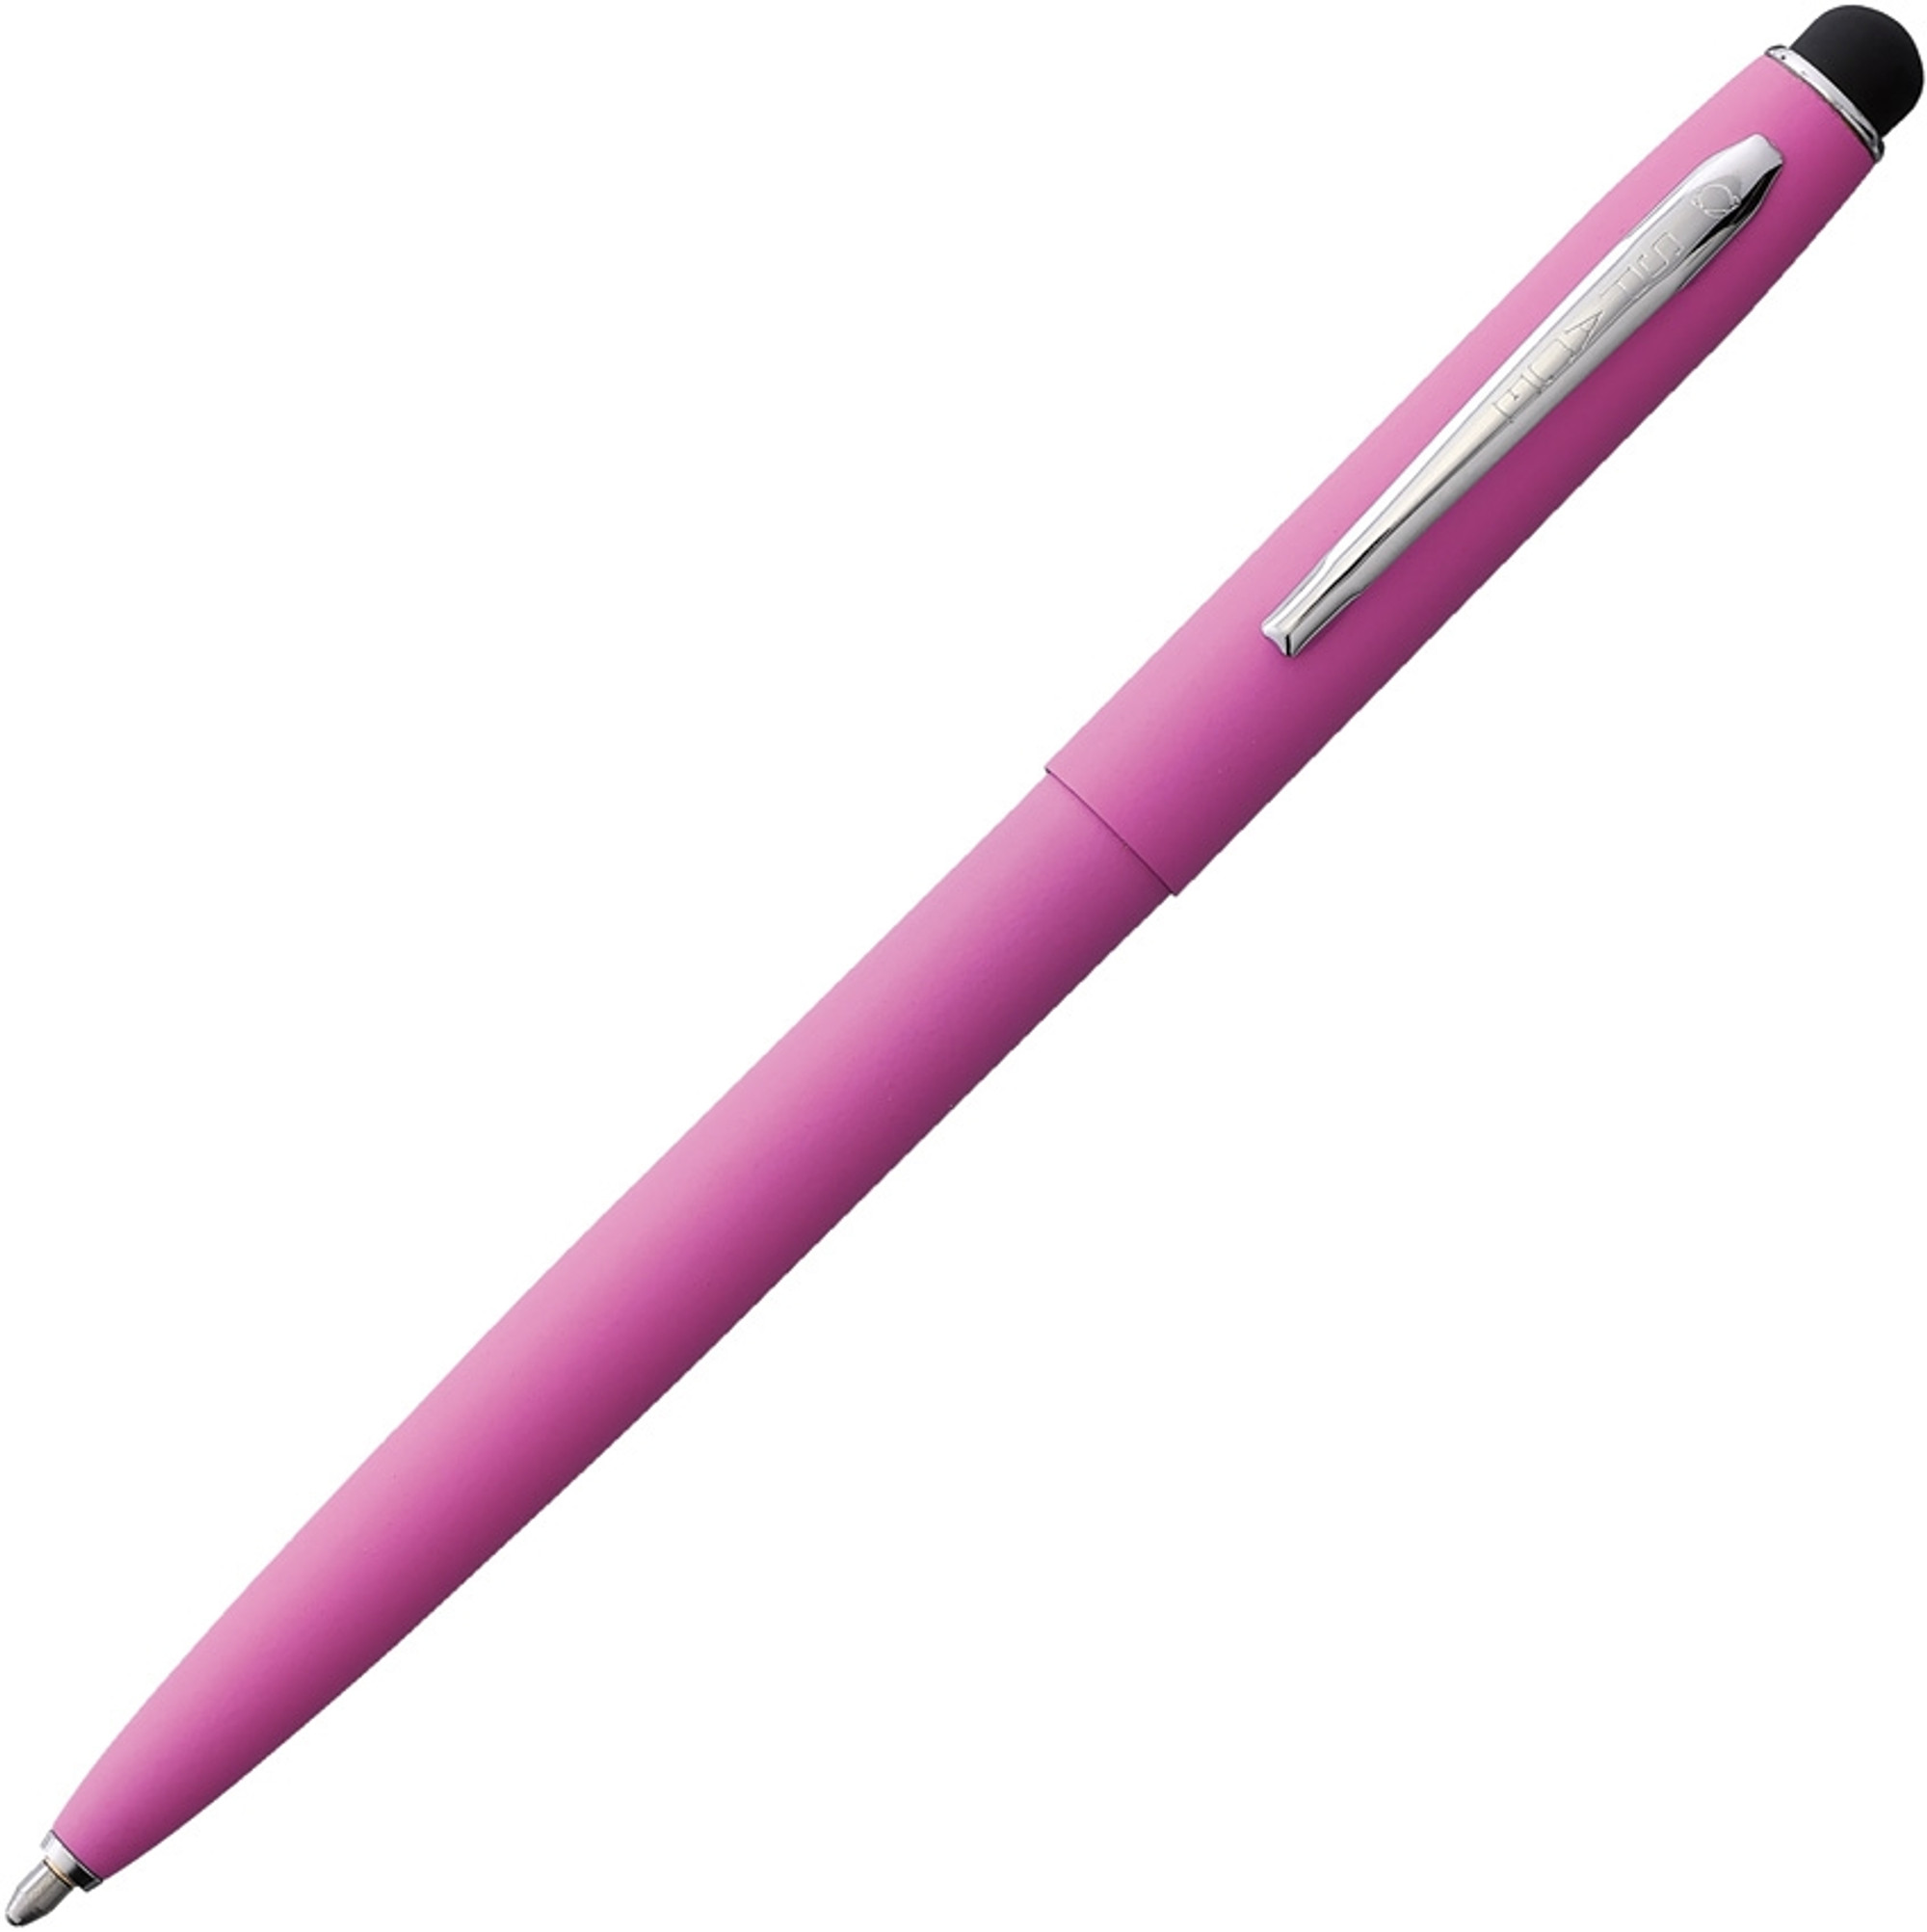 Pen and Stylus Space Pen Pink